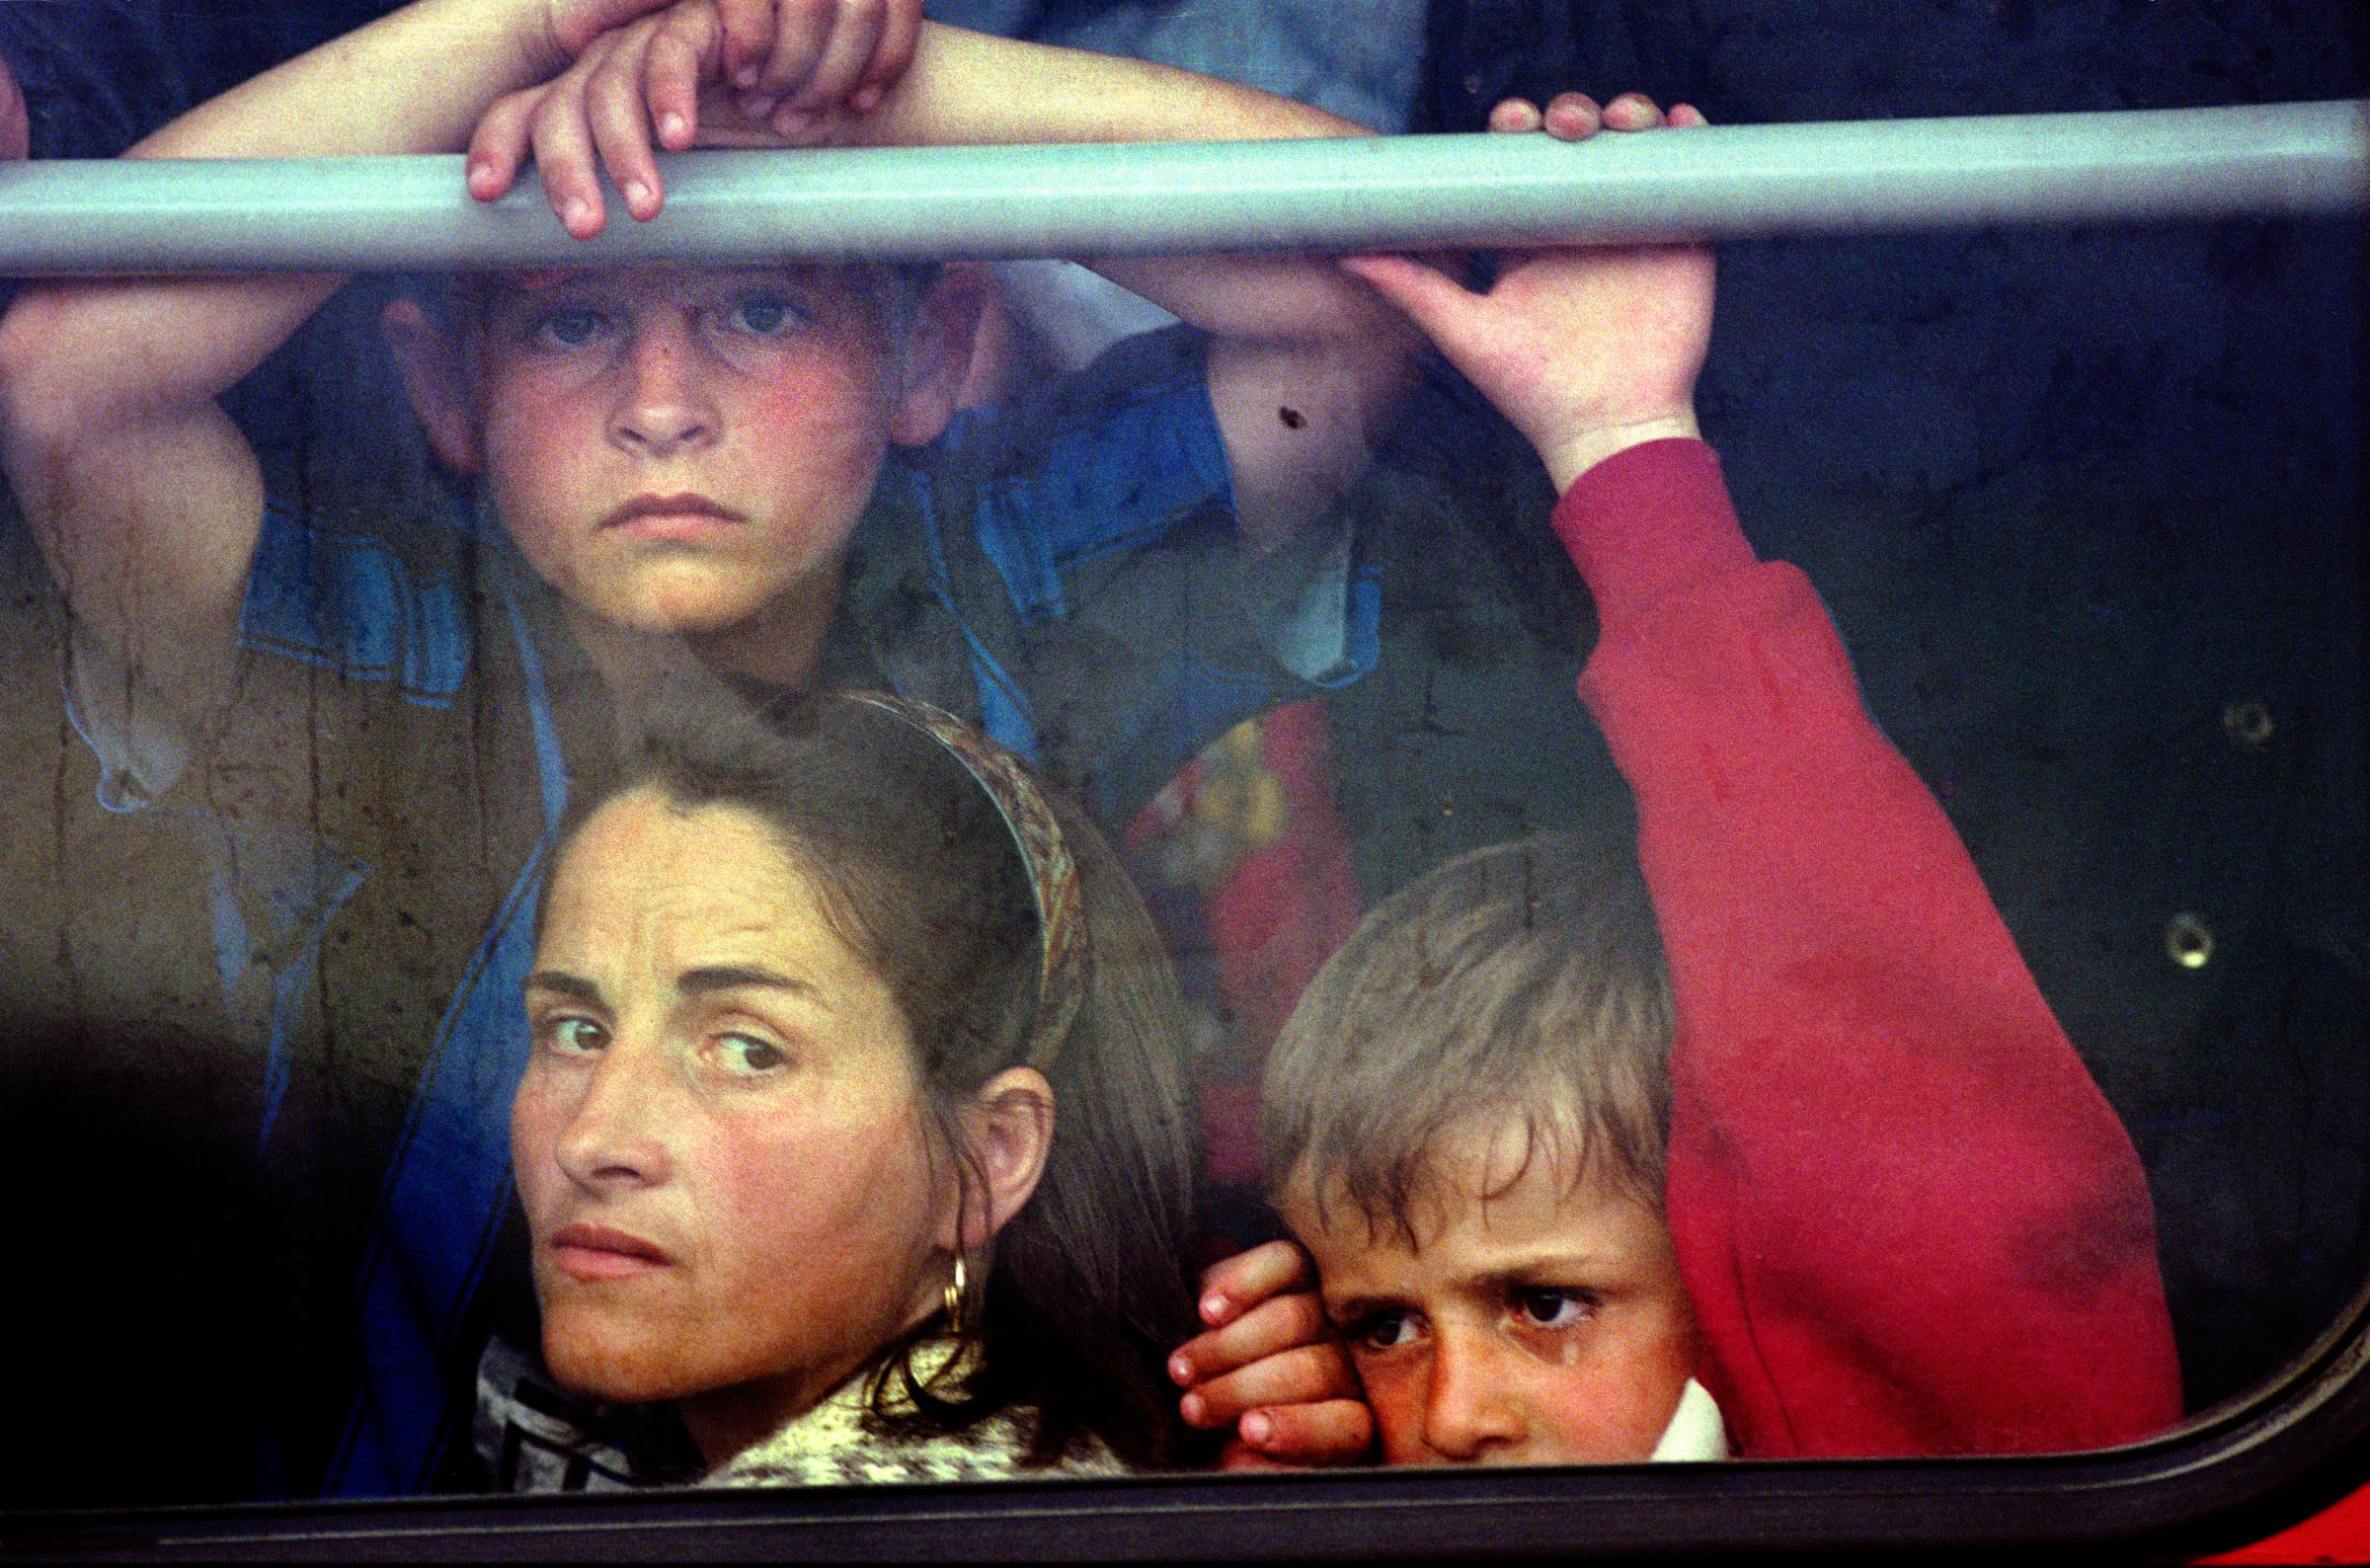 Flight From Kosovo - As the NATO bombing campaign persisted, refugees...